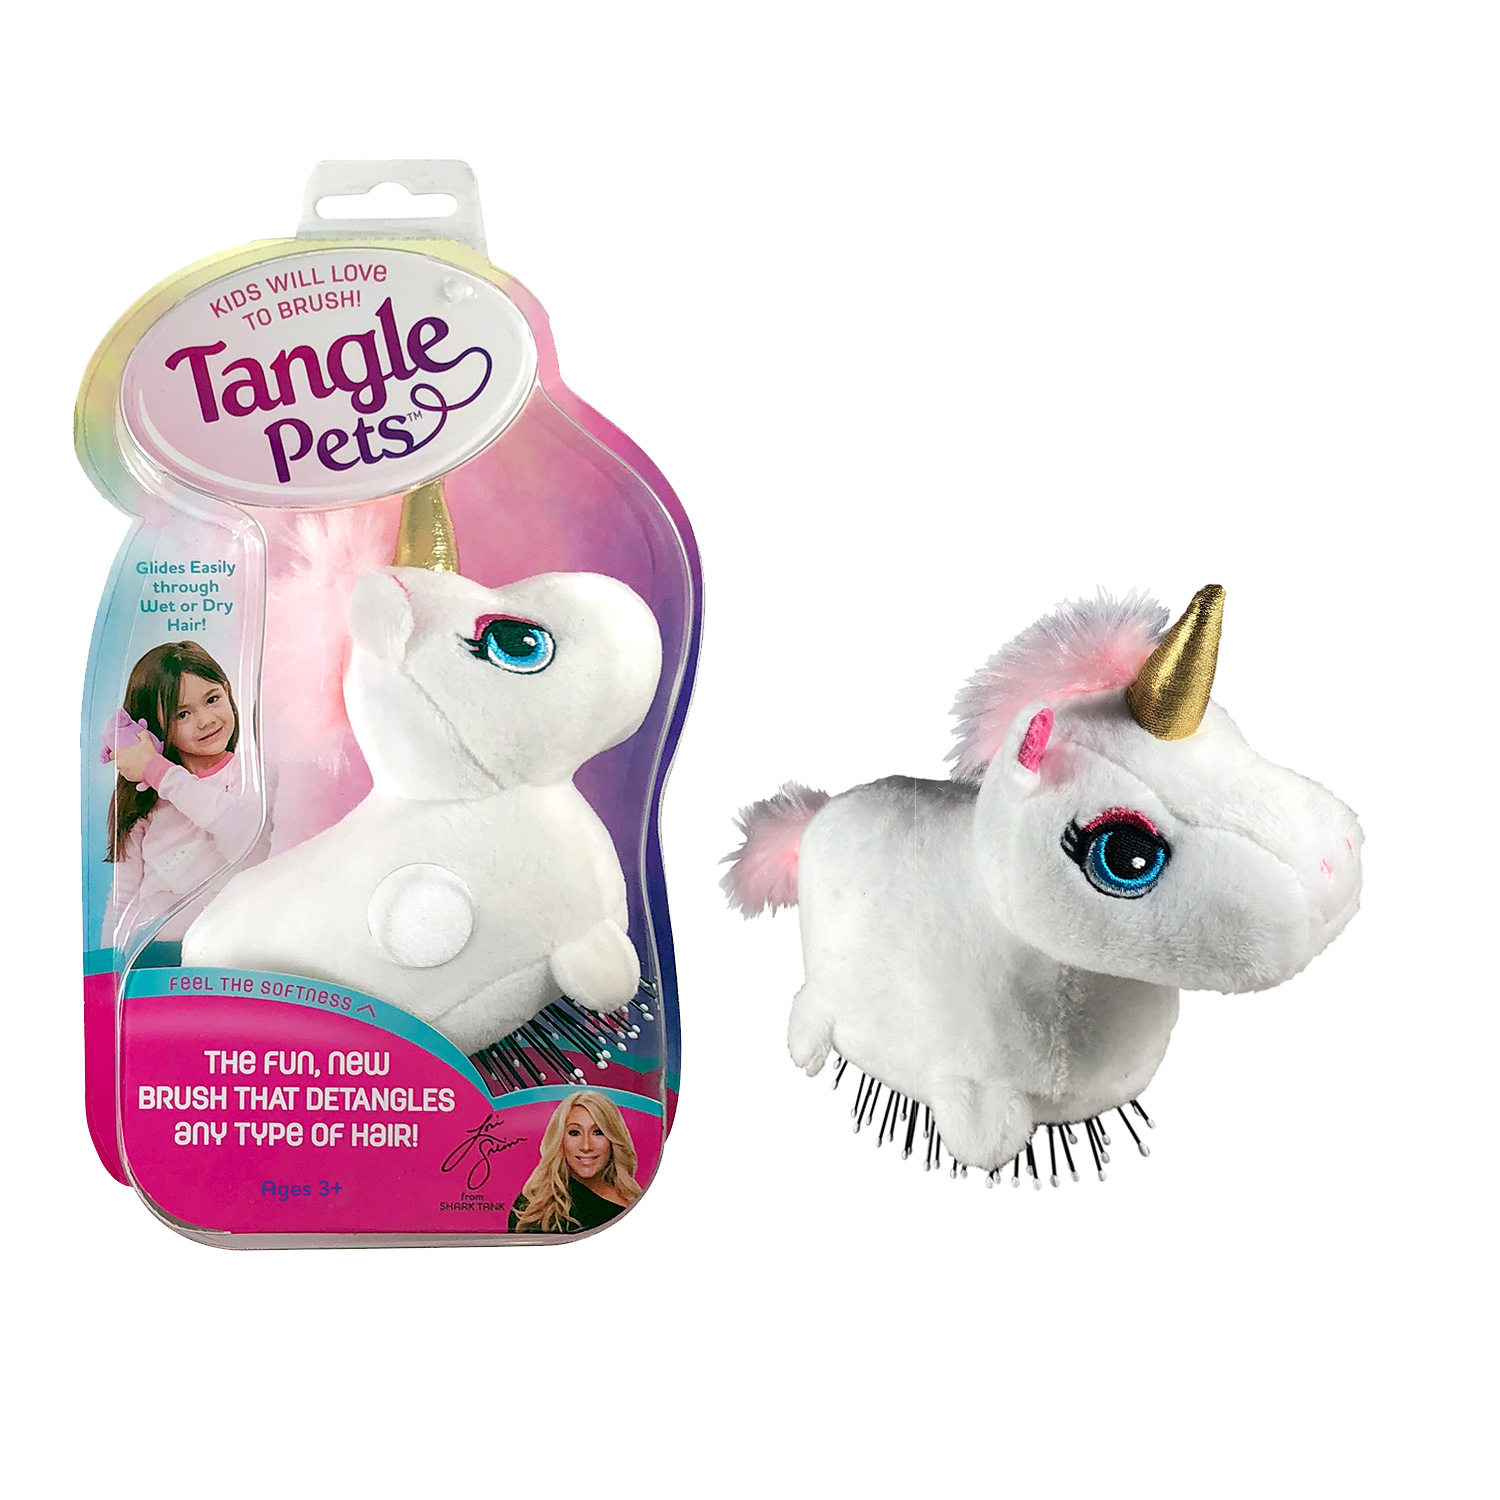 Tangle Pets Brush, Choose Sparkles the Unicorn or Cupcake the Cat - image 4 of 8